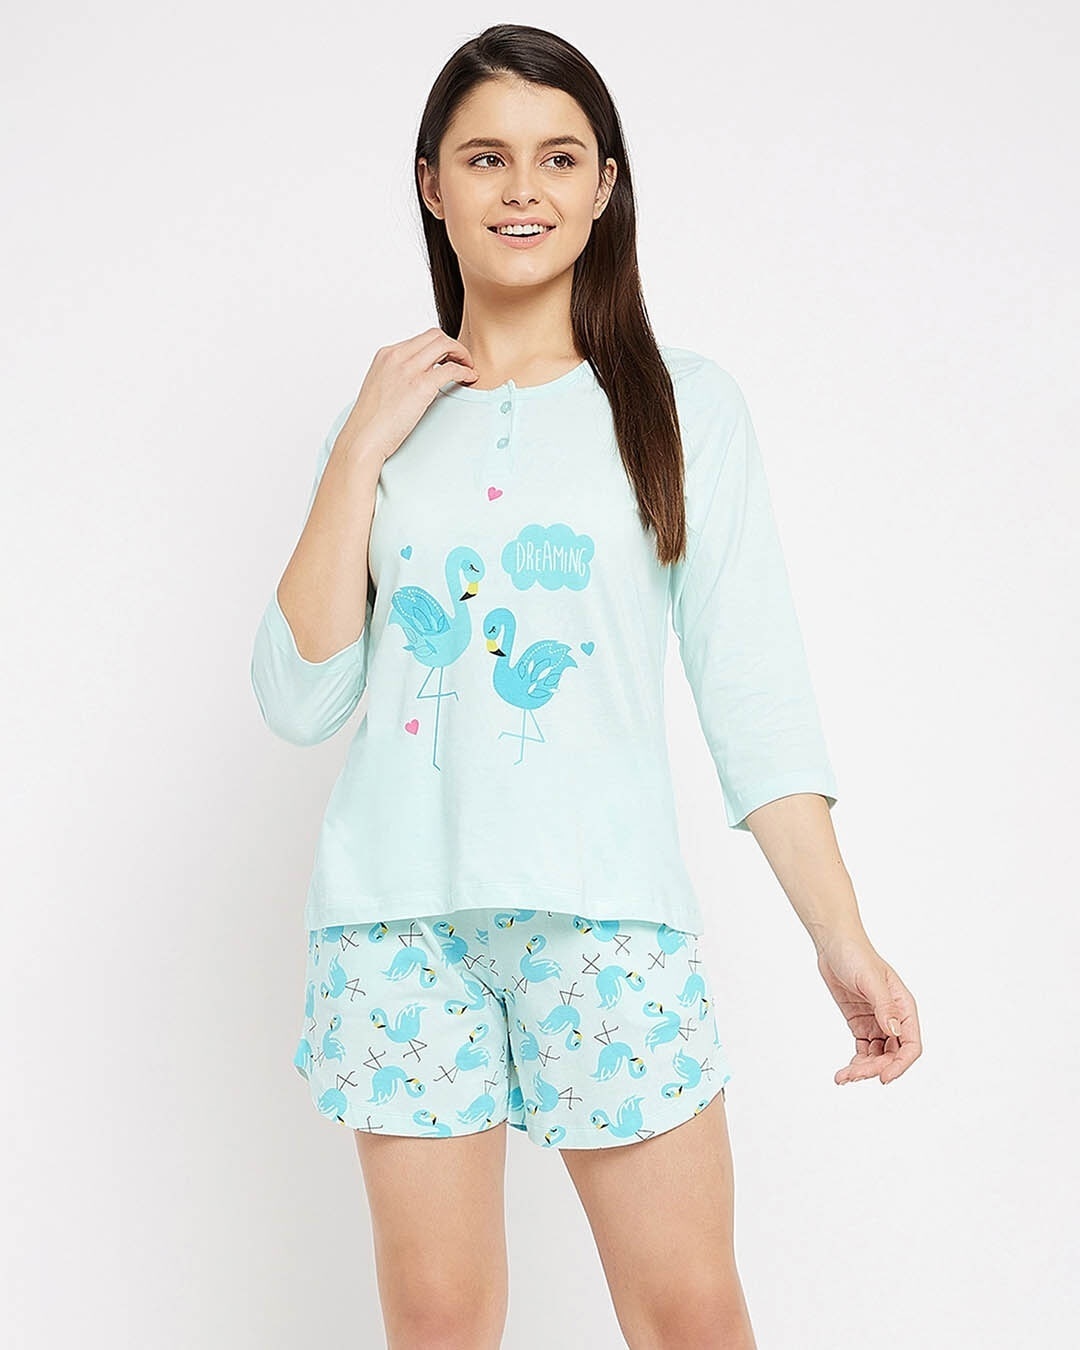 Shop Women's Blue Printed Top & Shorts Set (Pack of 2)